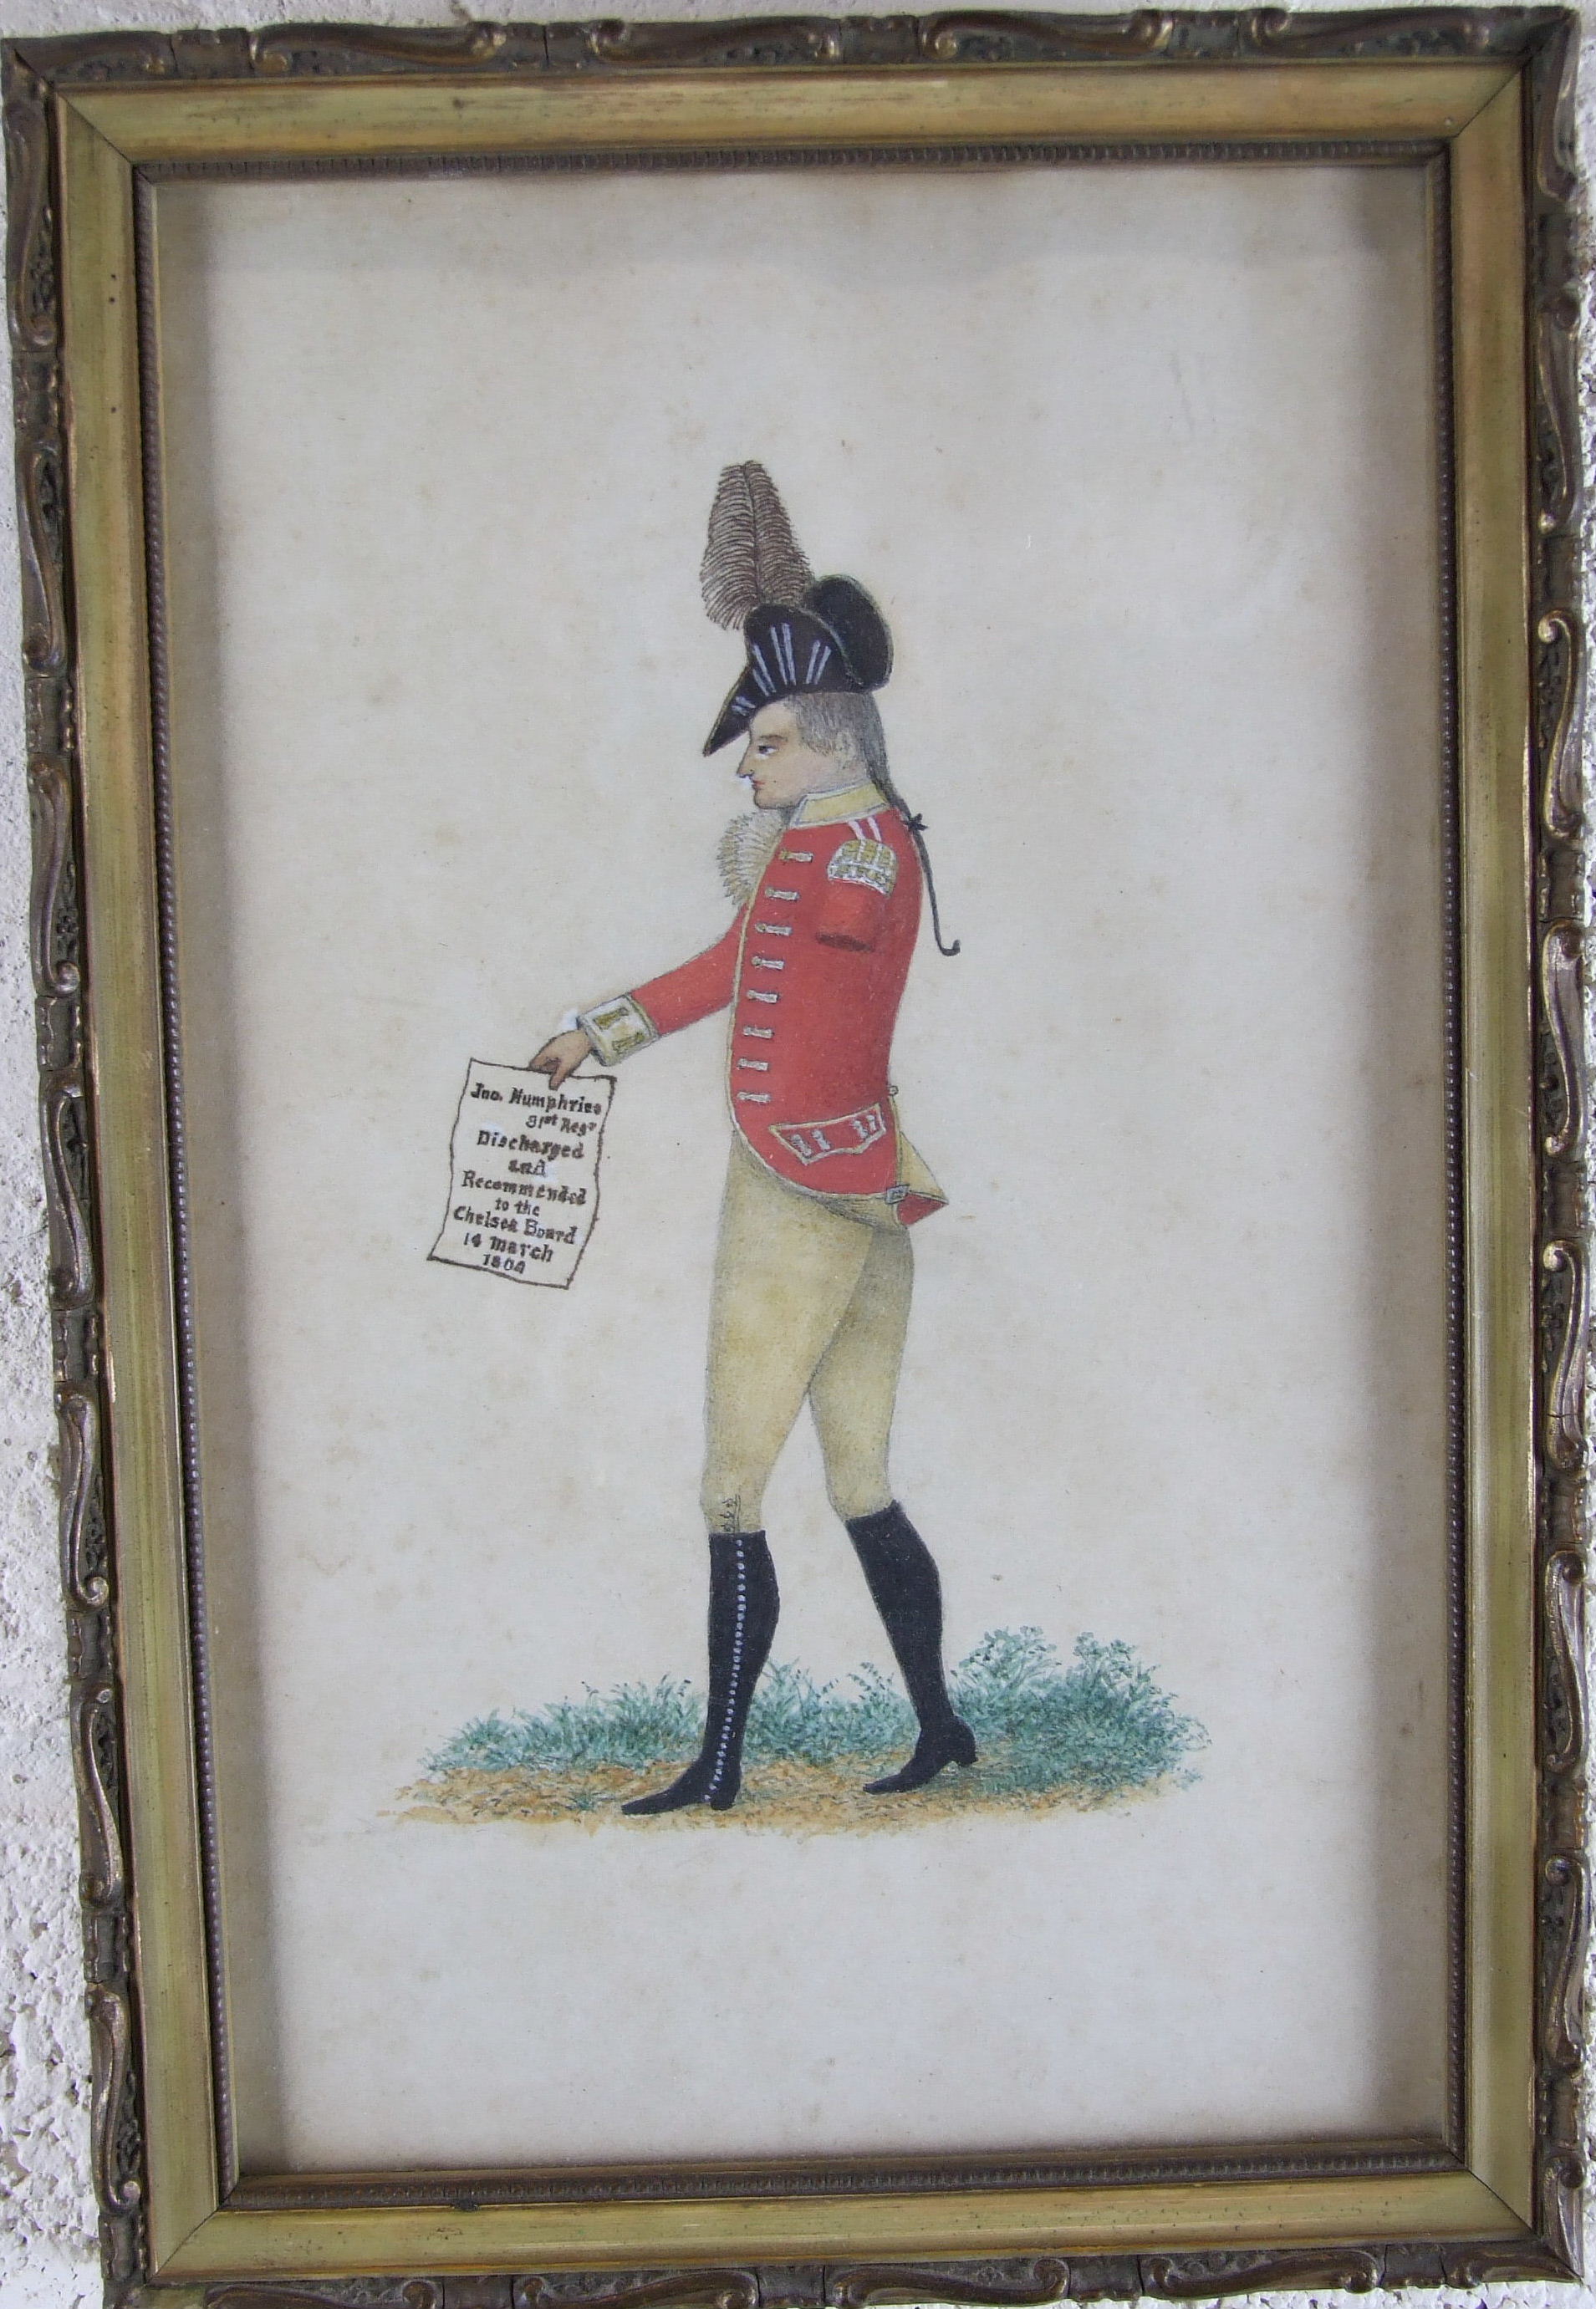 Early-19th century English School PORTRAIT OF AN INJURED SOLDIER, HIS LEFT ARM AMPUTATED, HOLDING